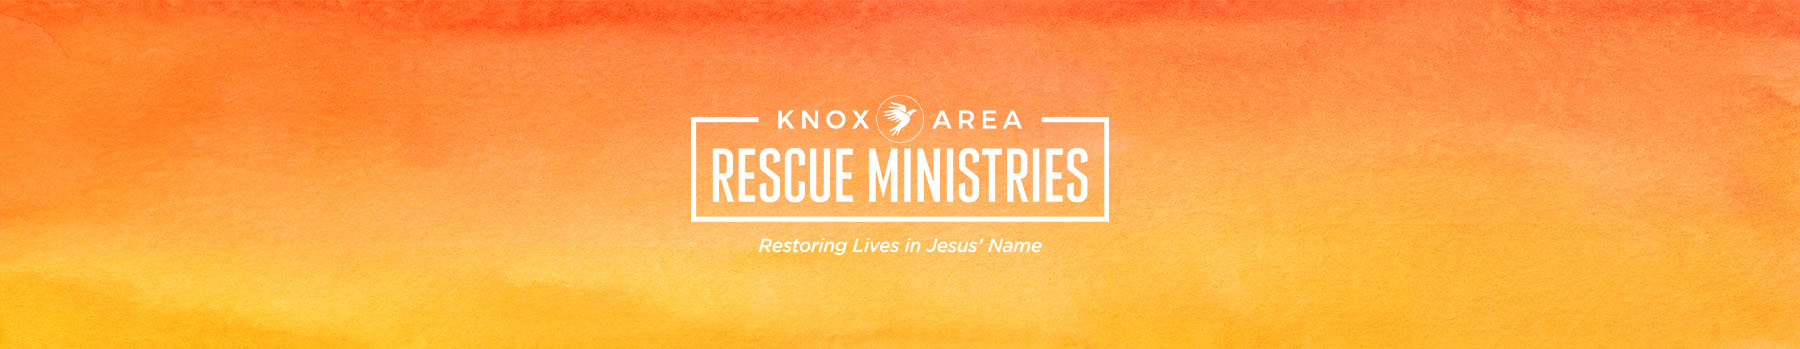 Knox Area Rescue Ministries Hope Rising 